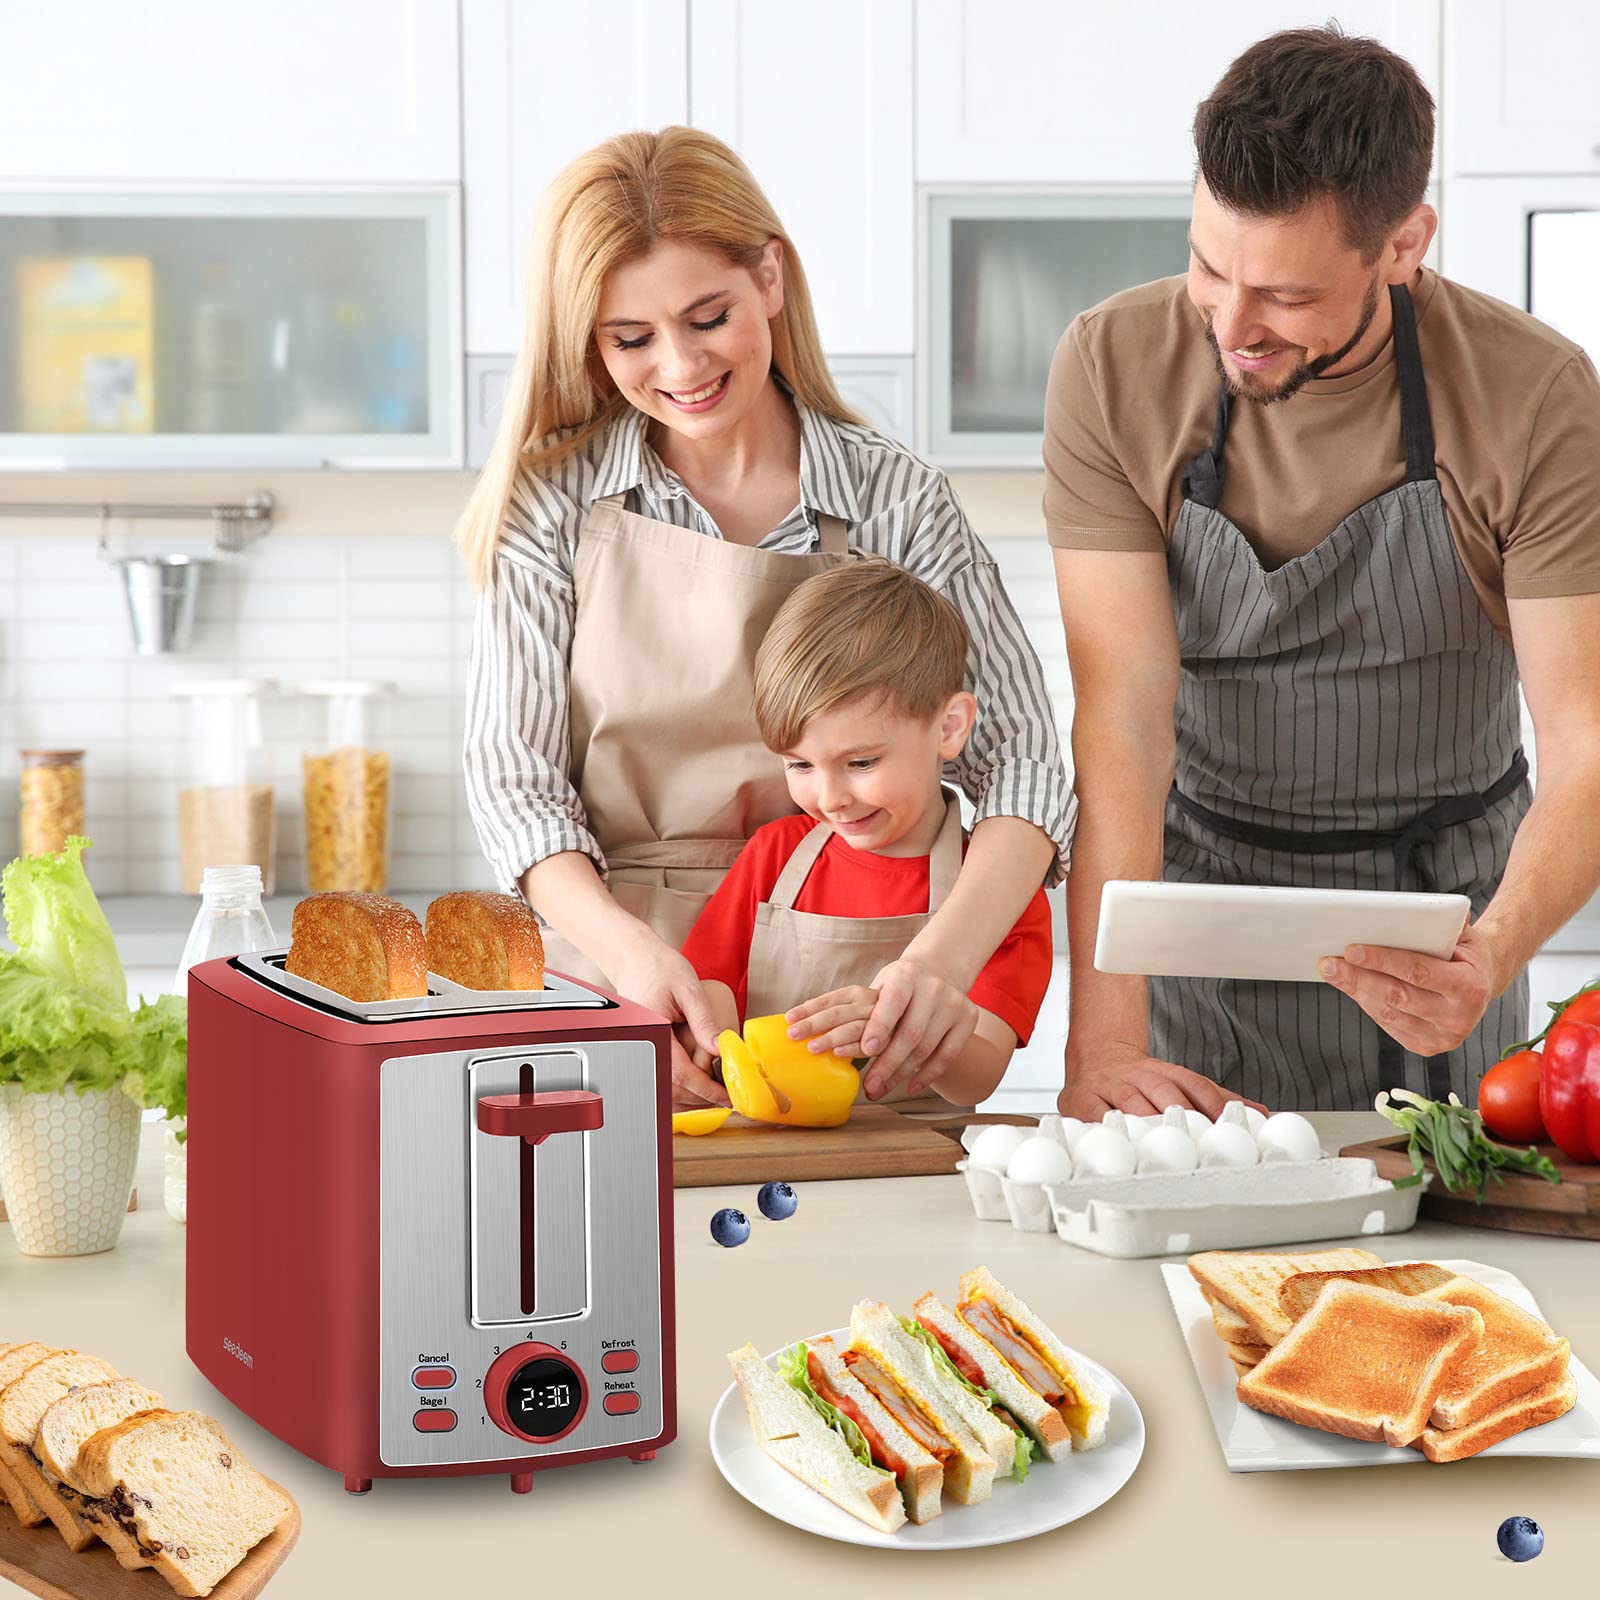 SEEDEEM Toaster 2 Slice, Bread Toaster with LCD Display, 7 Shade Settings, 1.４'' Variable Extra Wide Slots Toaster with Cancel, Bagel, Defrost, Reheat Functions, Removable Crumb Tray, 900W, Retro Red